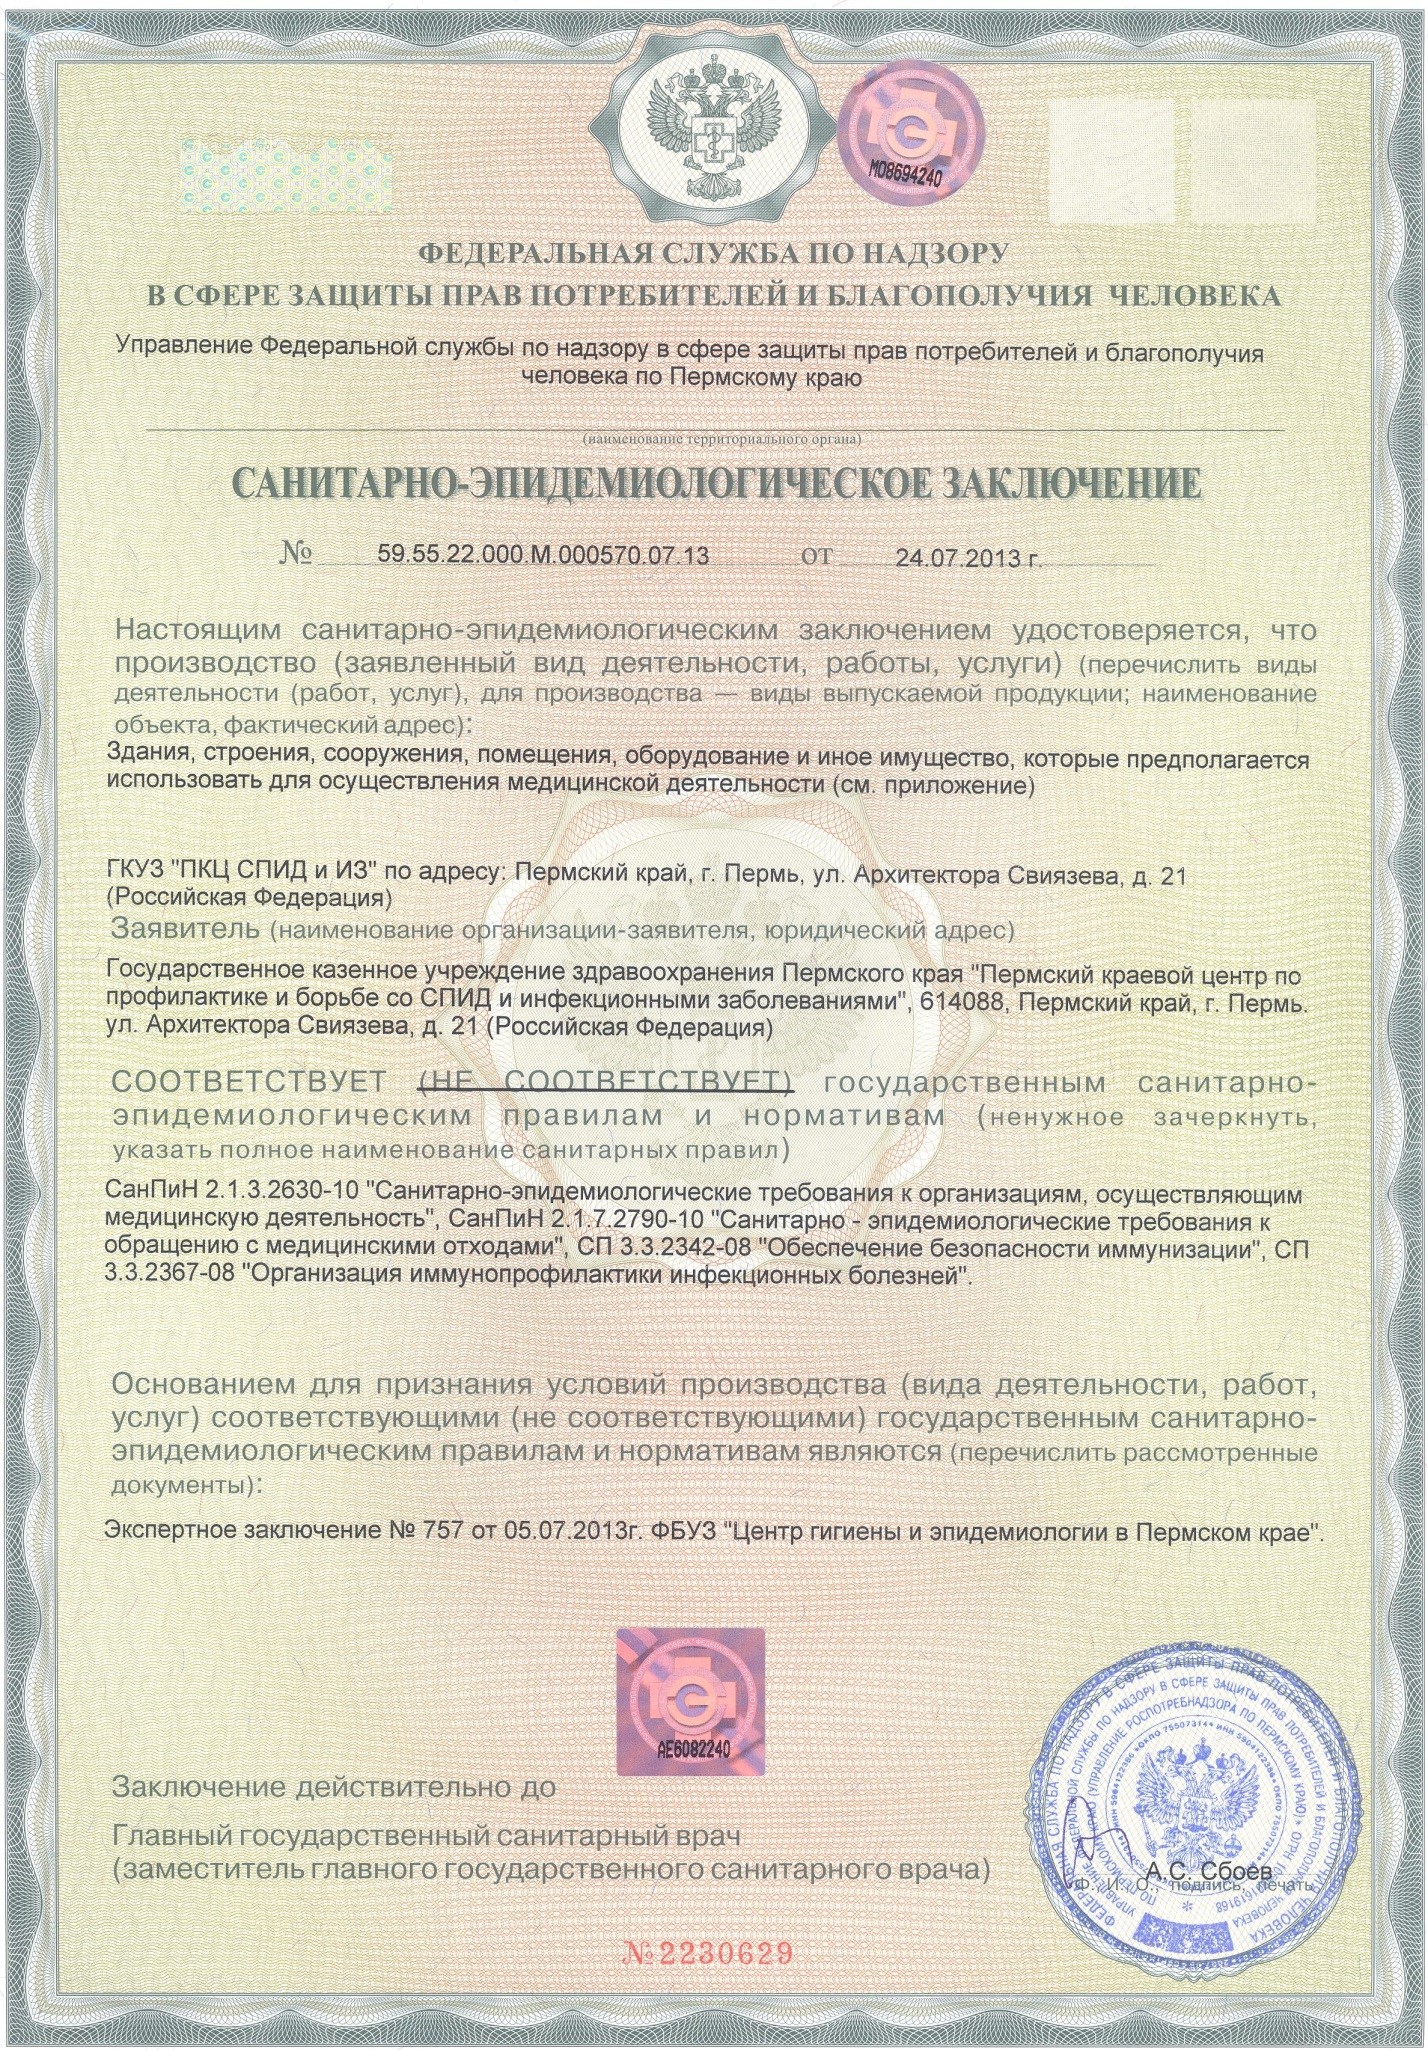 Sanitary-epidemiological certificate1